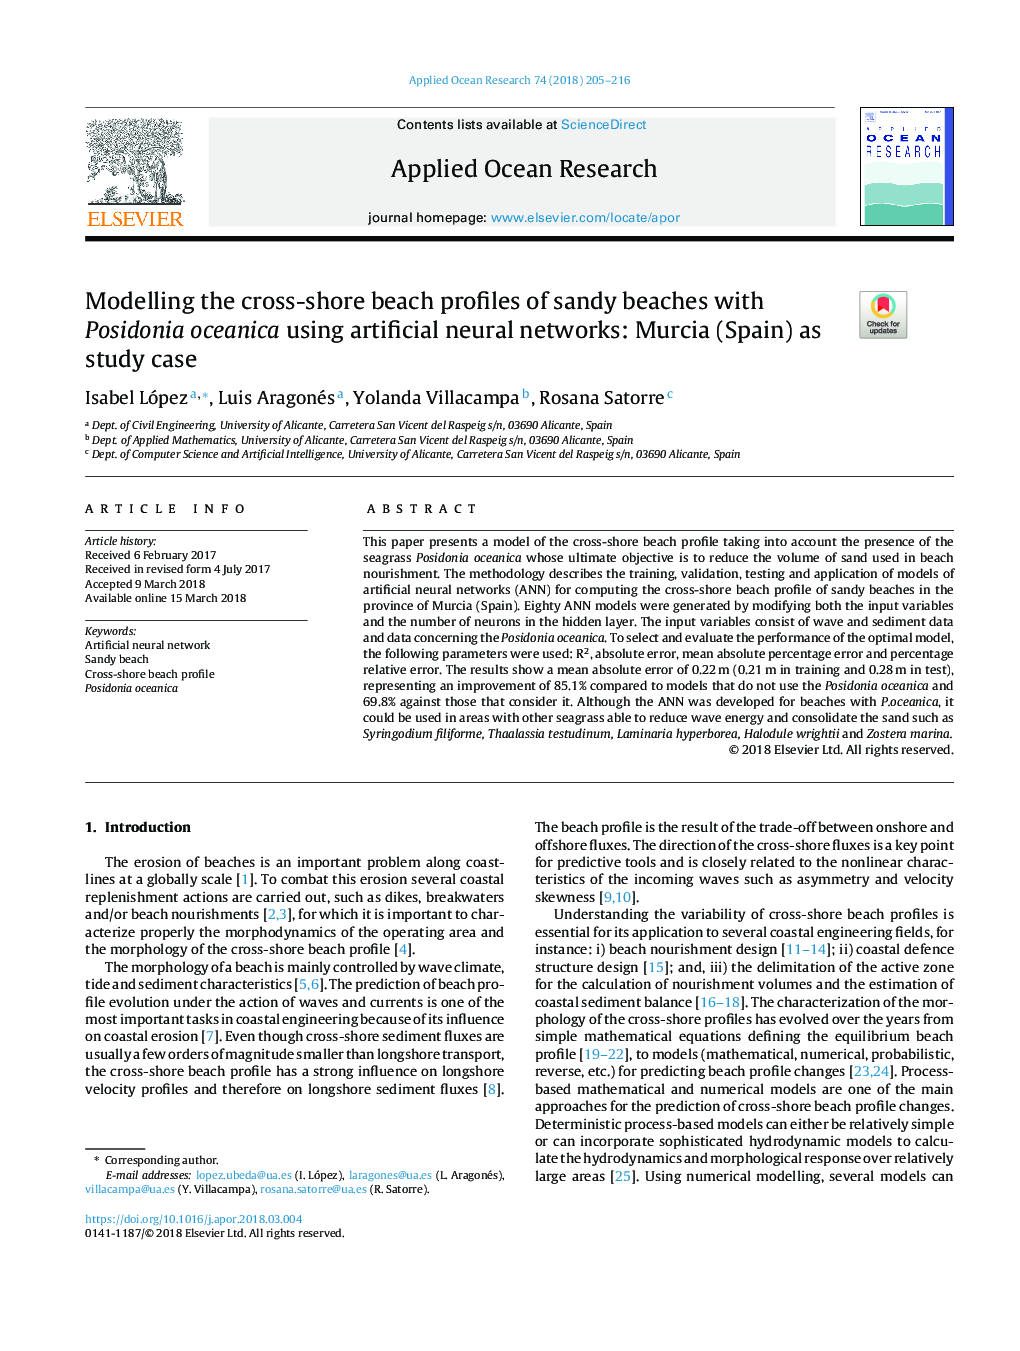 Modelling the cross-shore beach profiles of sandy beaches with Posidonia oceanica using artificial neural networks: Murcia (Spain) as study case